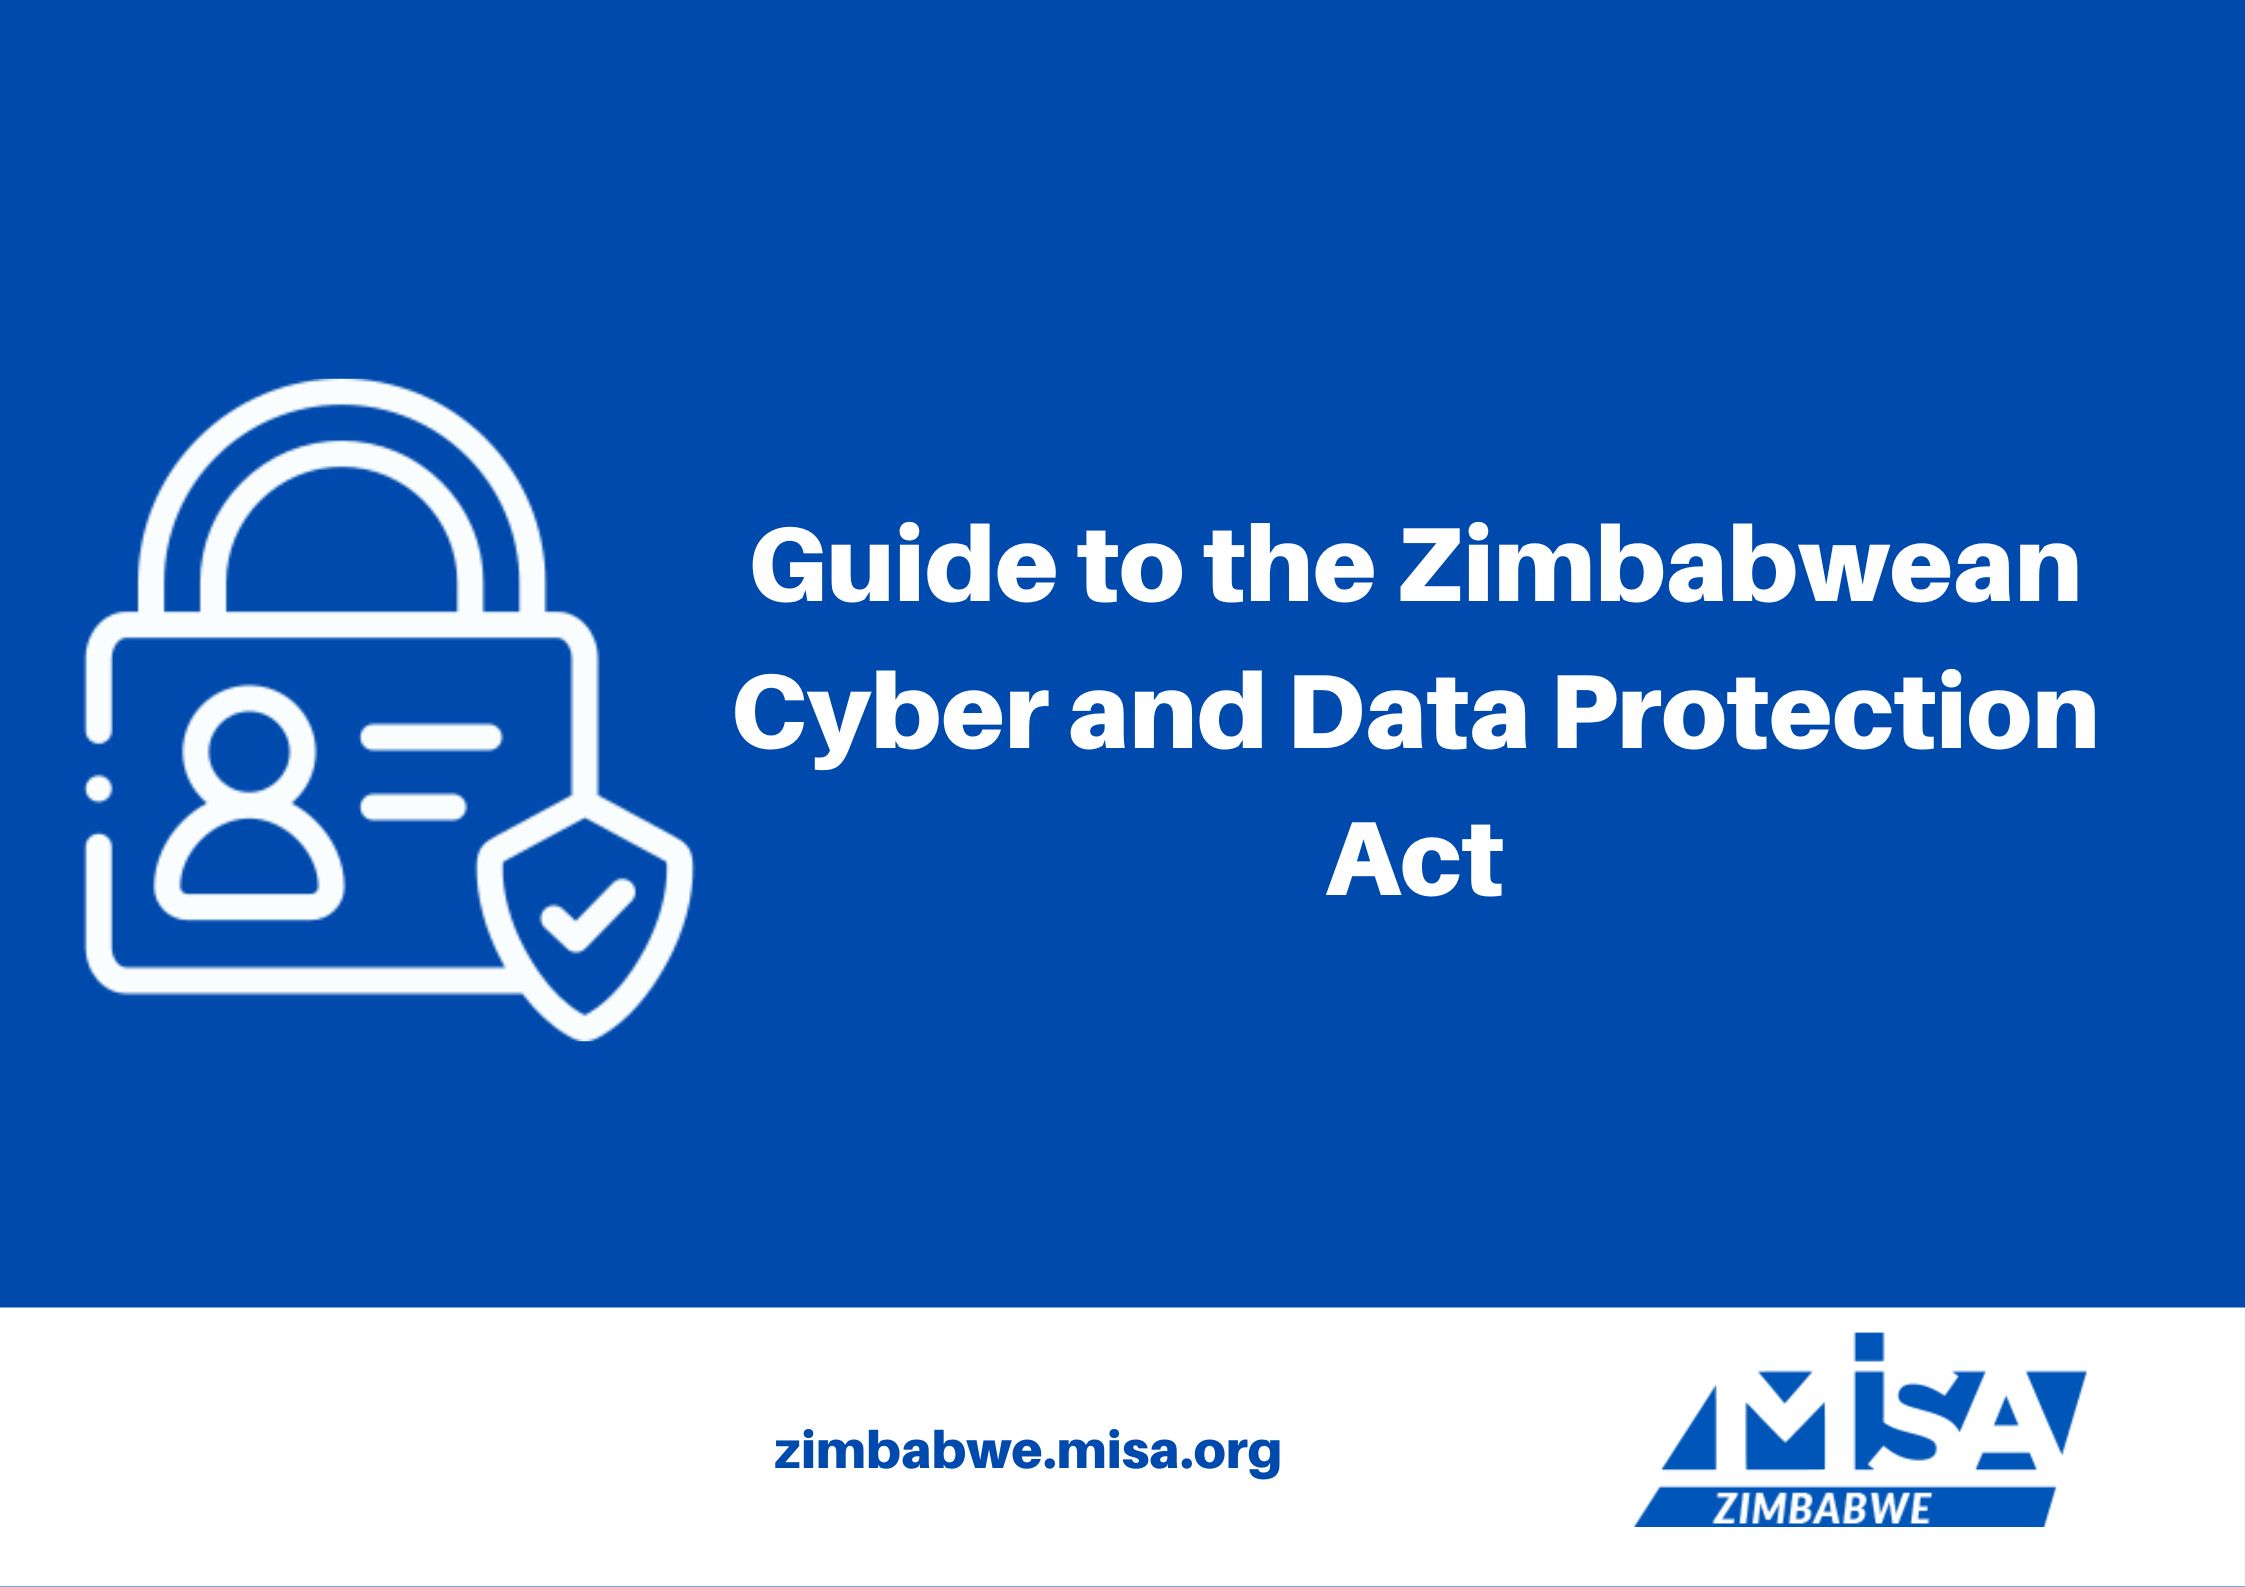 Guide to the Zimbabwean Cyber and Data Protection Act